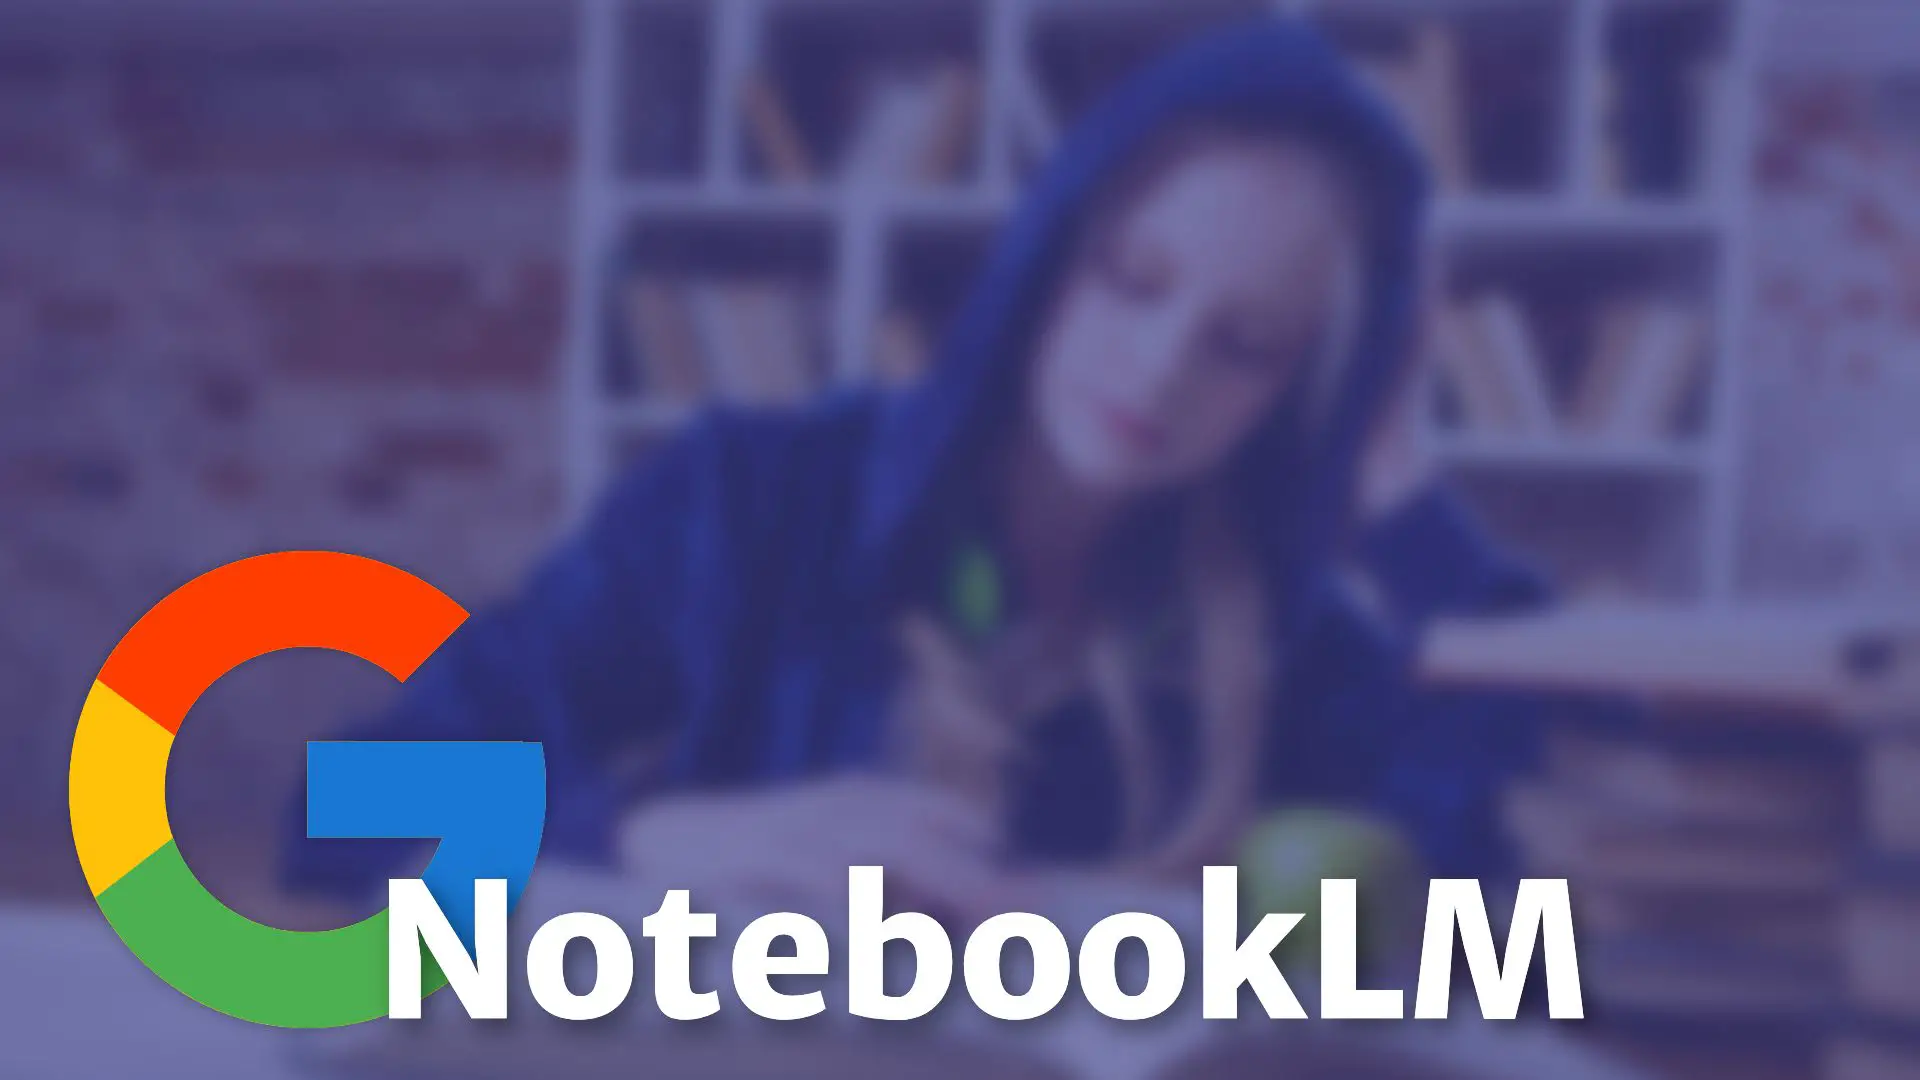 Google’s AI-infused NotebookLM note-taking app is open to everyone in the US